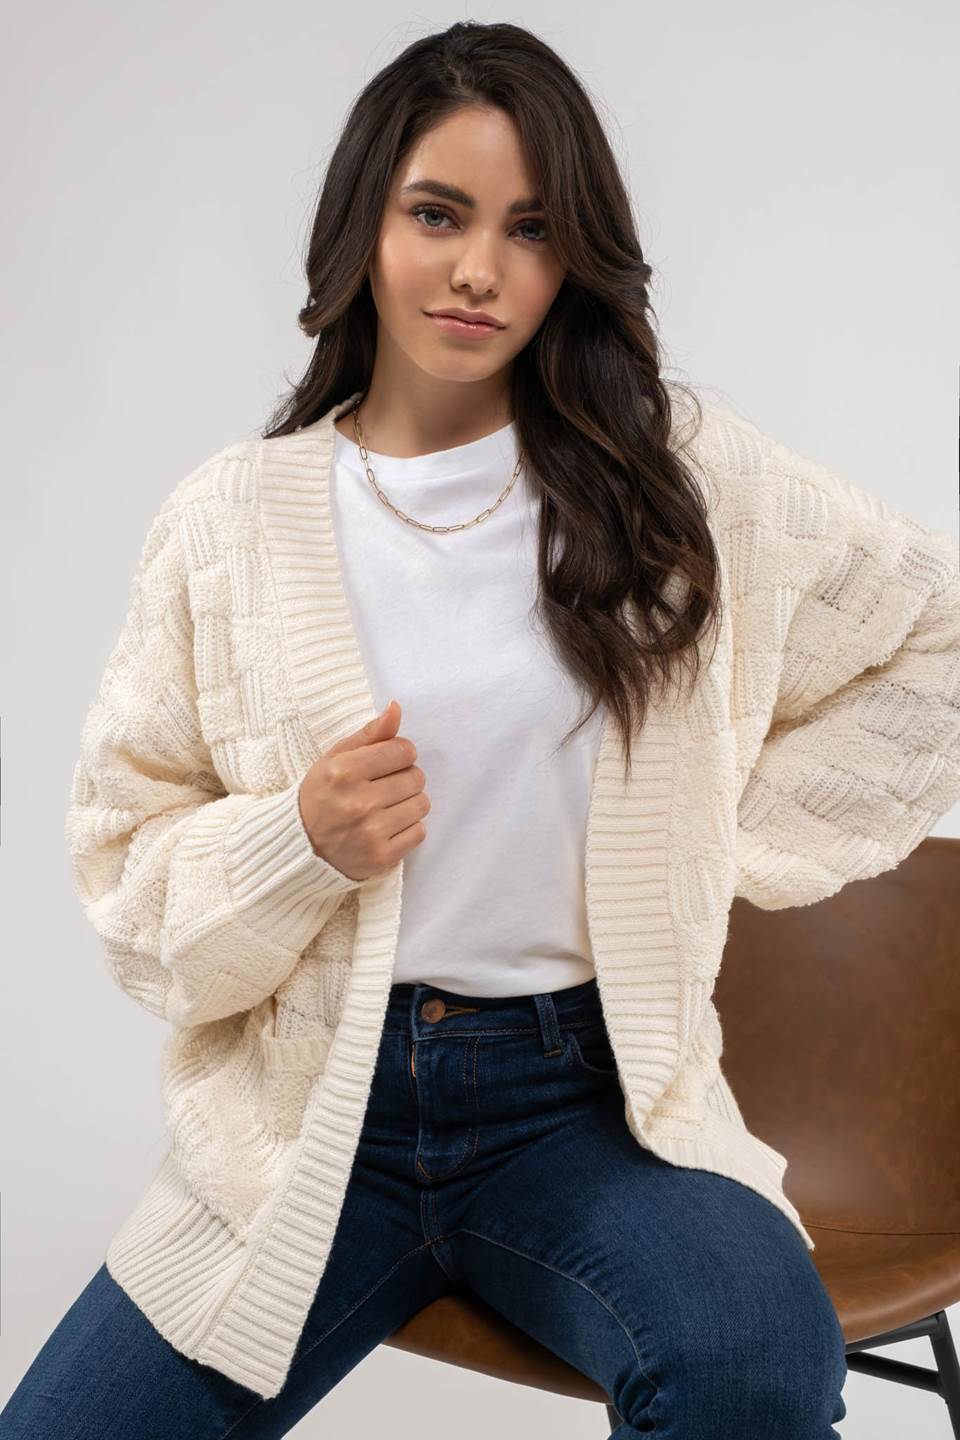 CHECKERED TEXTURED KNIT CARDIGAN